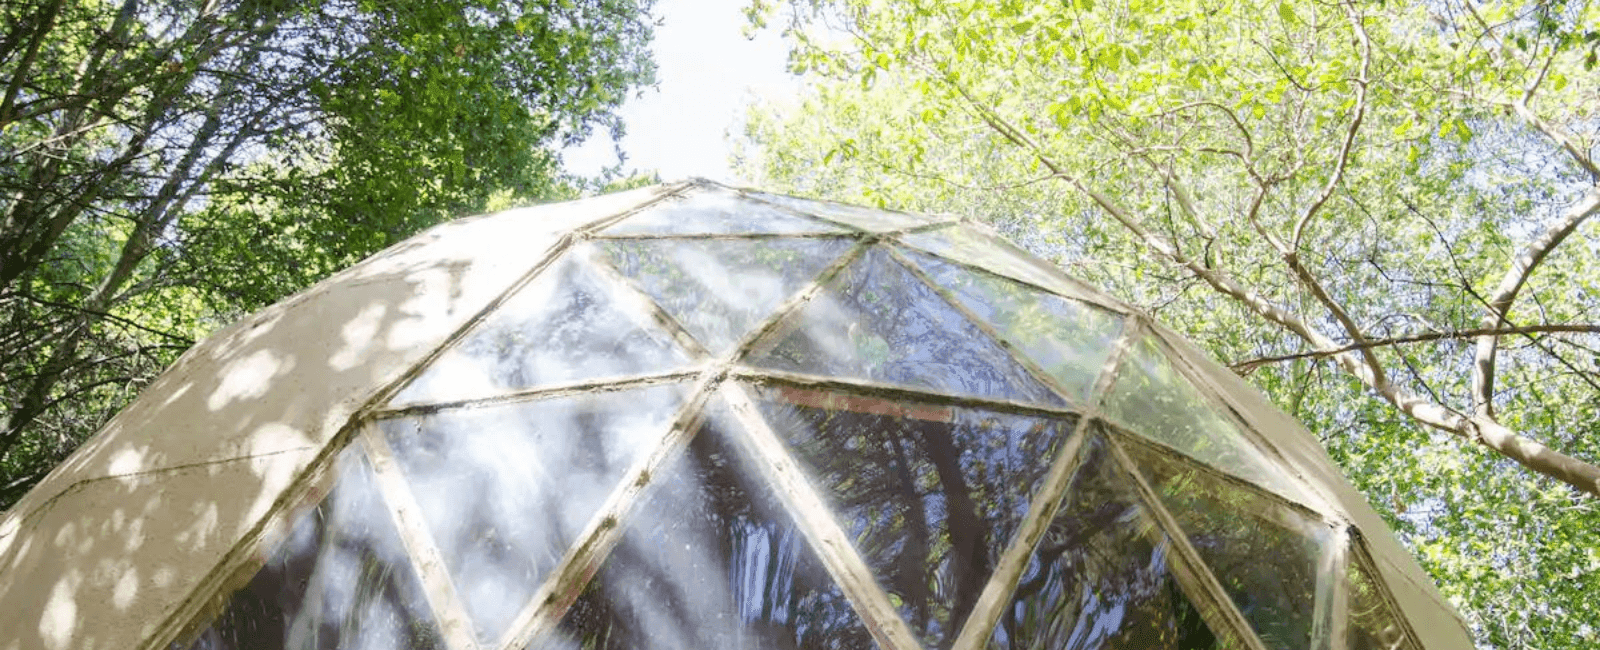 The Most-Visited Airbnb in the World Is a Mushroom Dome